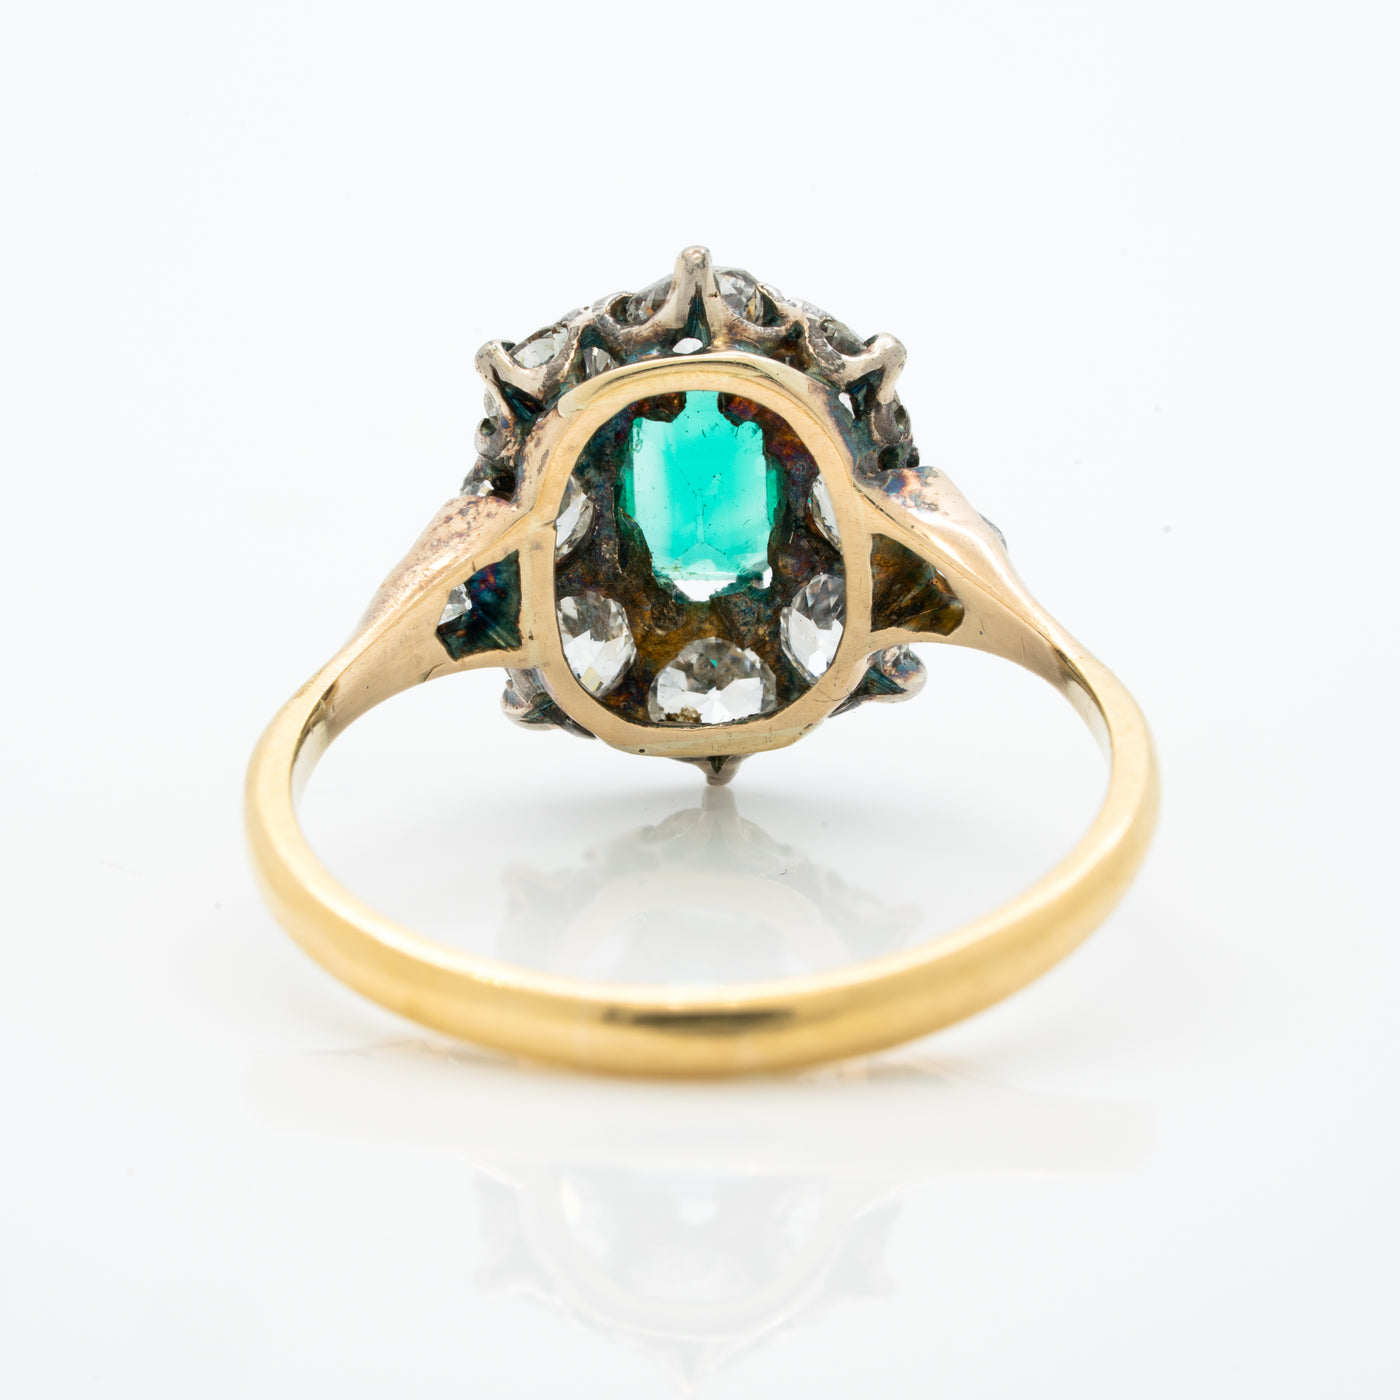 VICTORIAN 18K YELLOW GOLD AND SILVER AND 1.0CTS COLOMBIAN EMERALD and 1.50CTS OLD EUROPEAN CUT DIAMOND HALO RING c.1850s